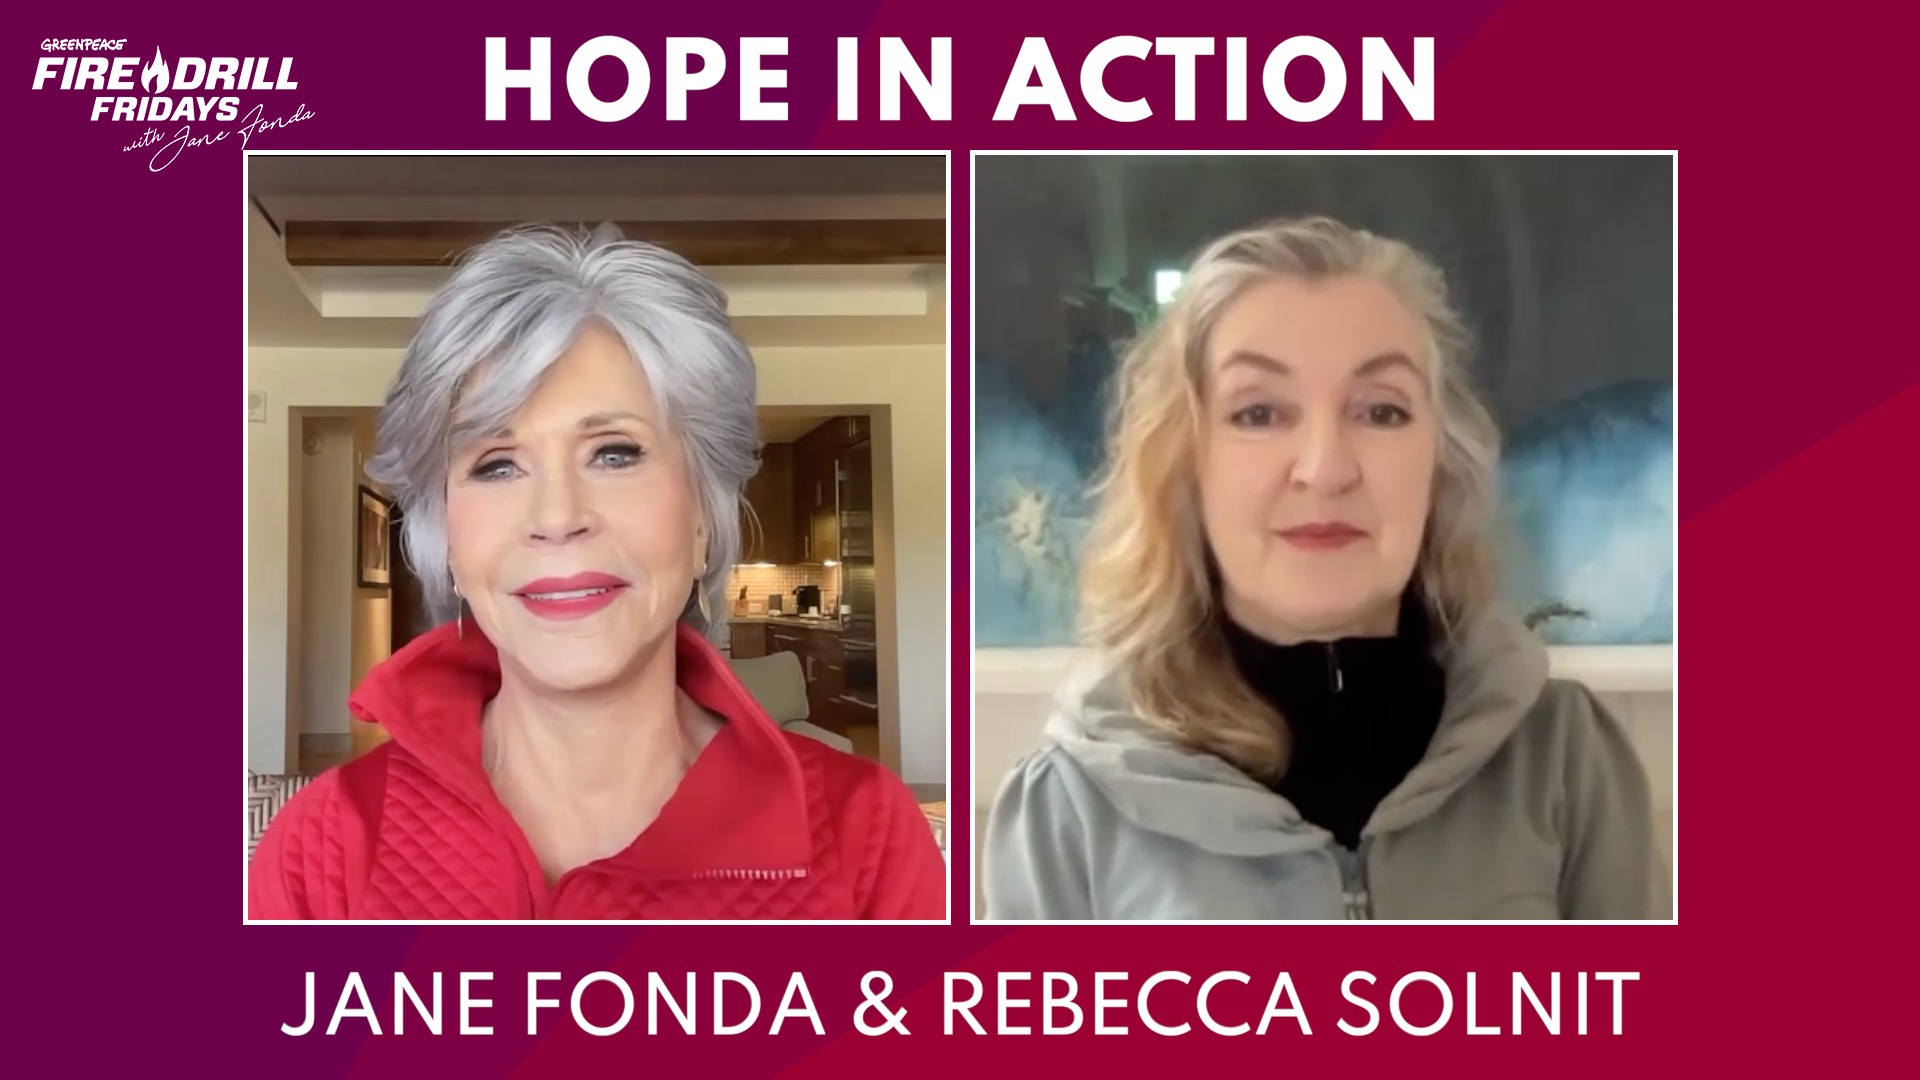 Watch Fire Drill Fridays Welcomes the New Year with Hope in Action